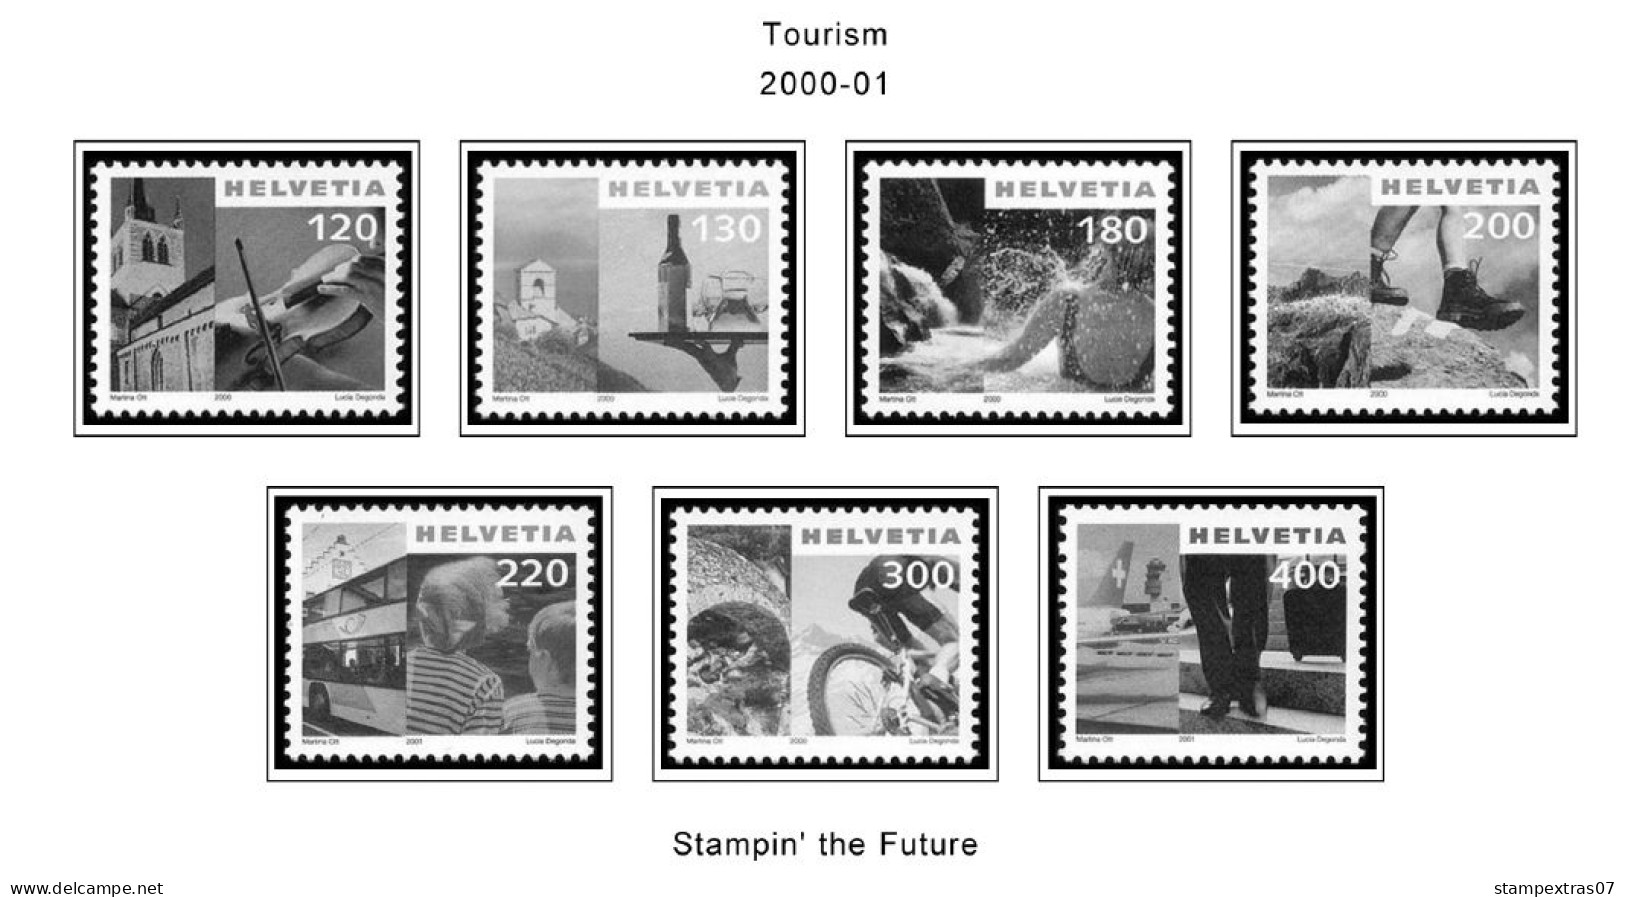 SWITZERLAND 1843-2010 + 2011-2020 STAMP ALBUM PAGES (277 B&w Illustrated Pages) - Engels